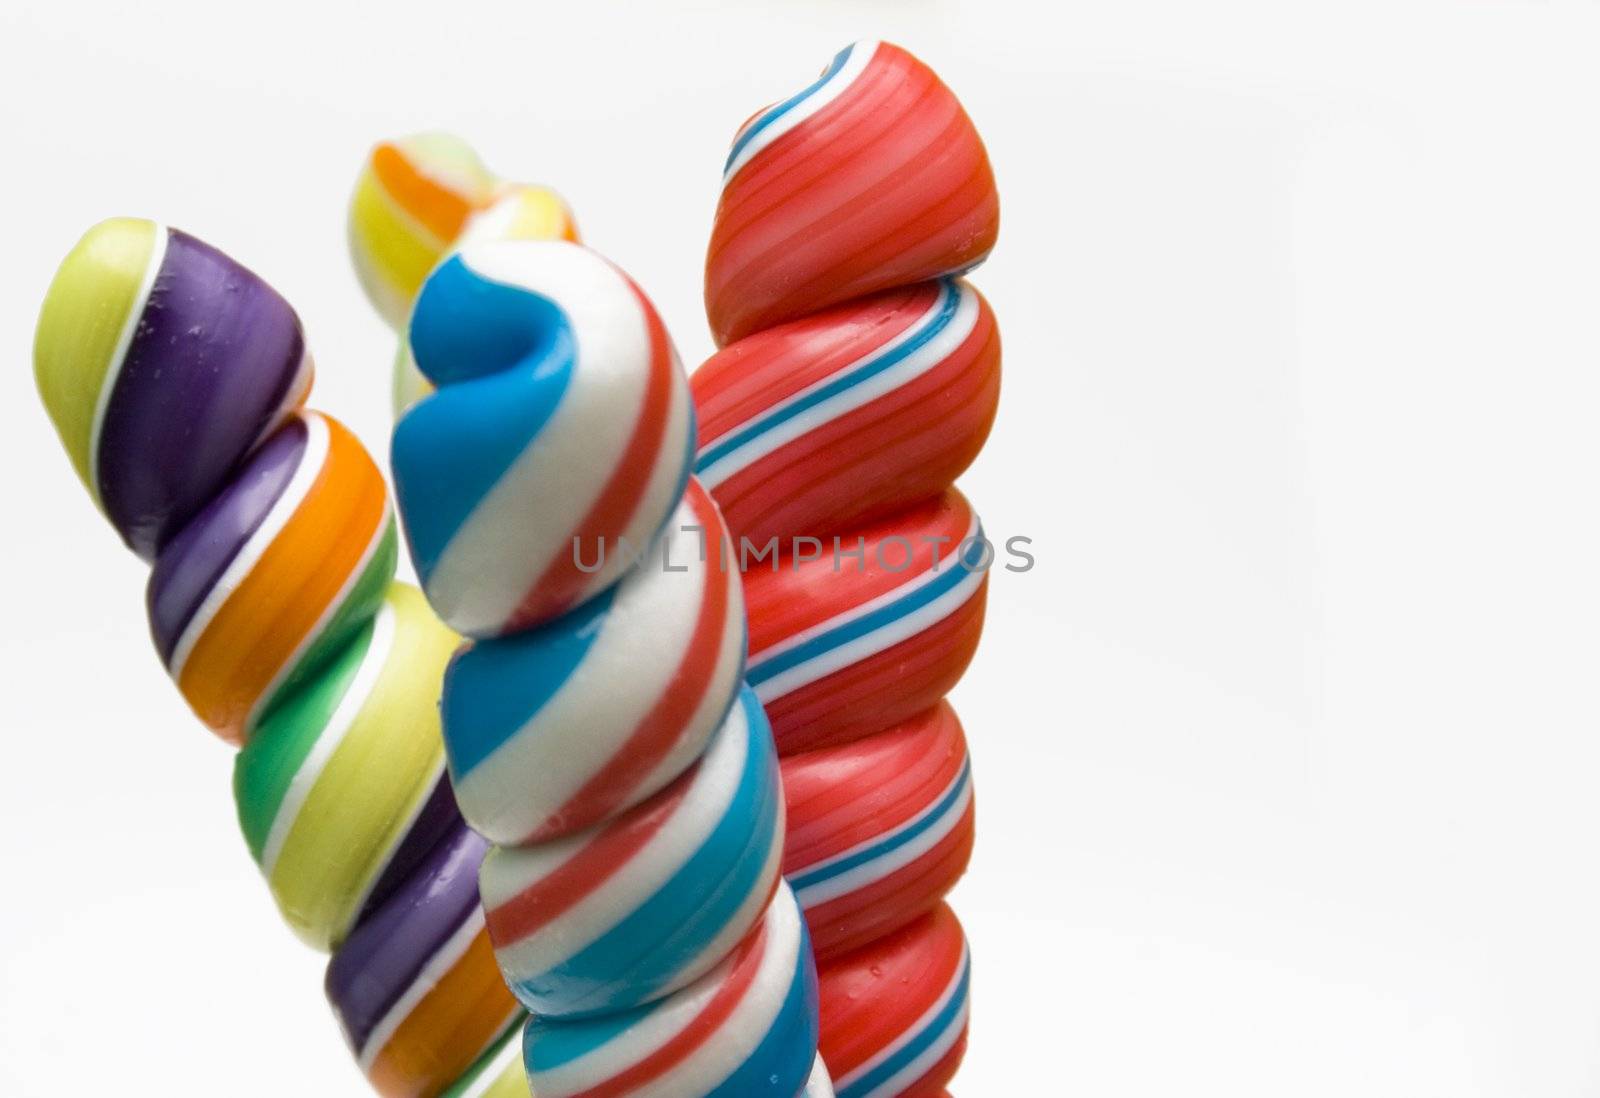 Twisted brightly colored candies on stick against a white background